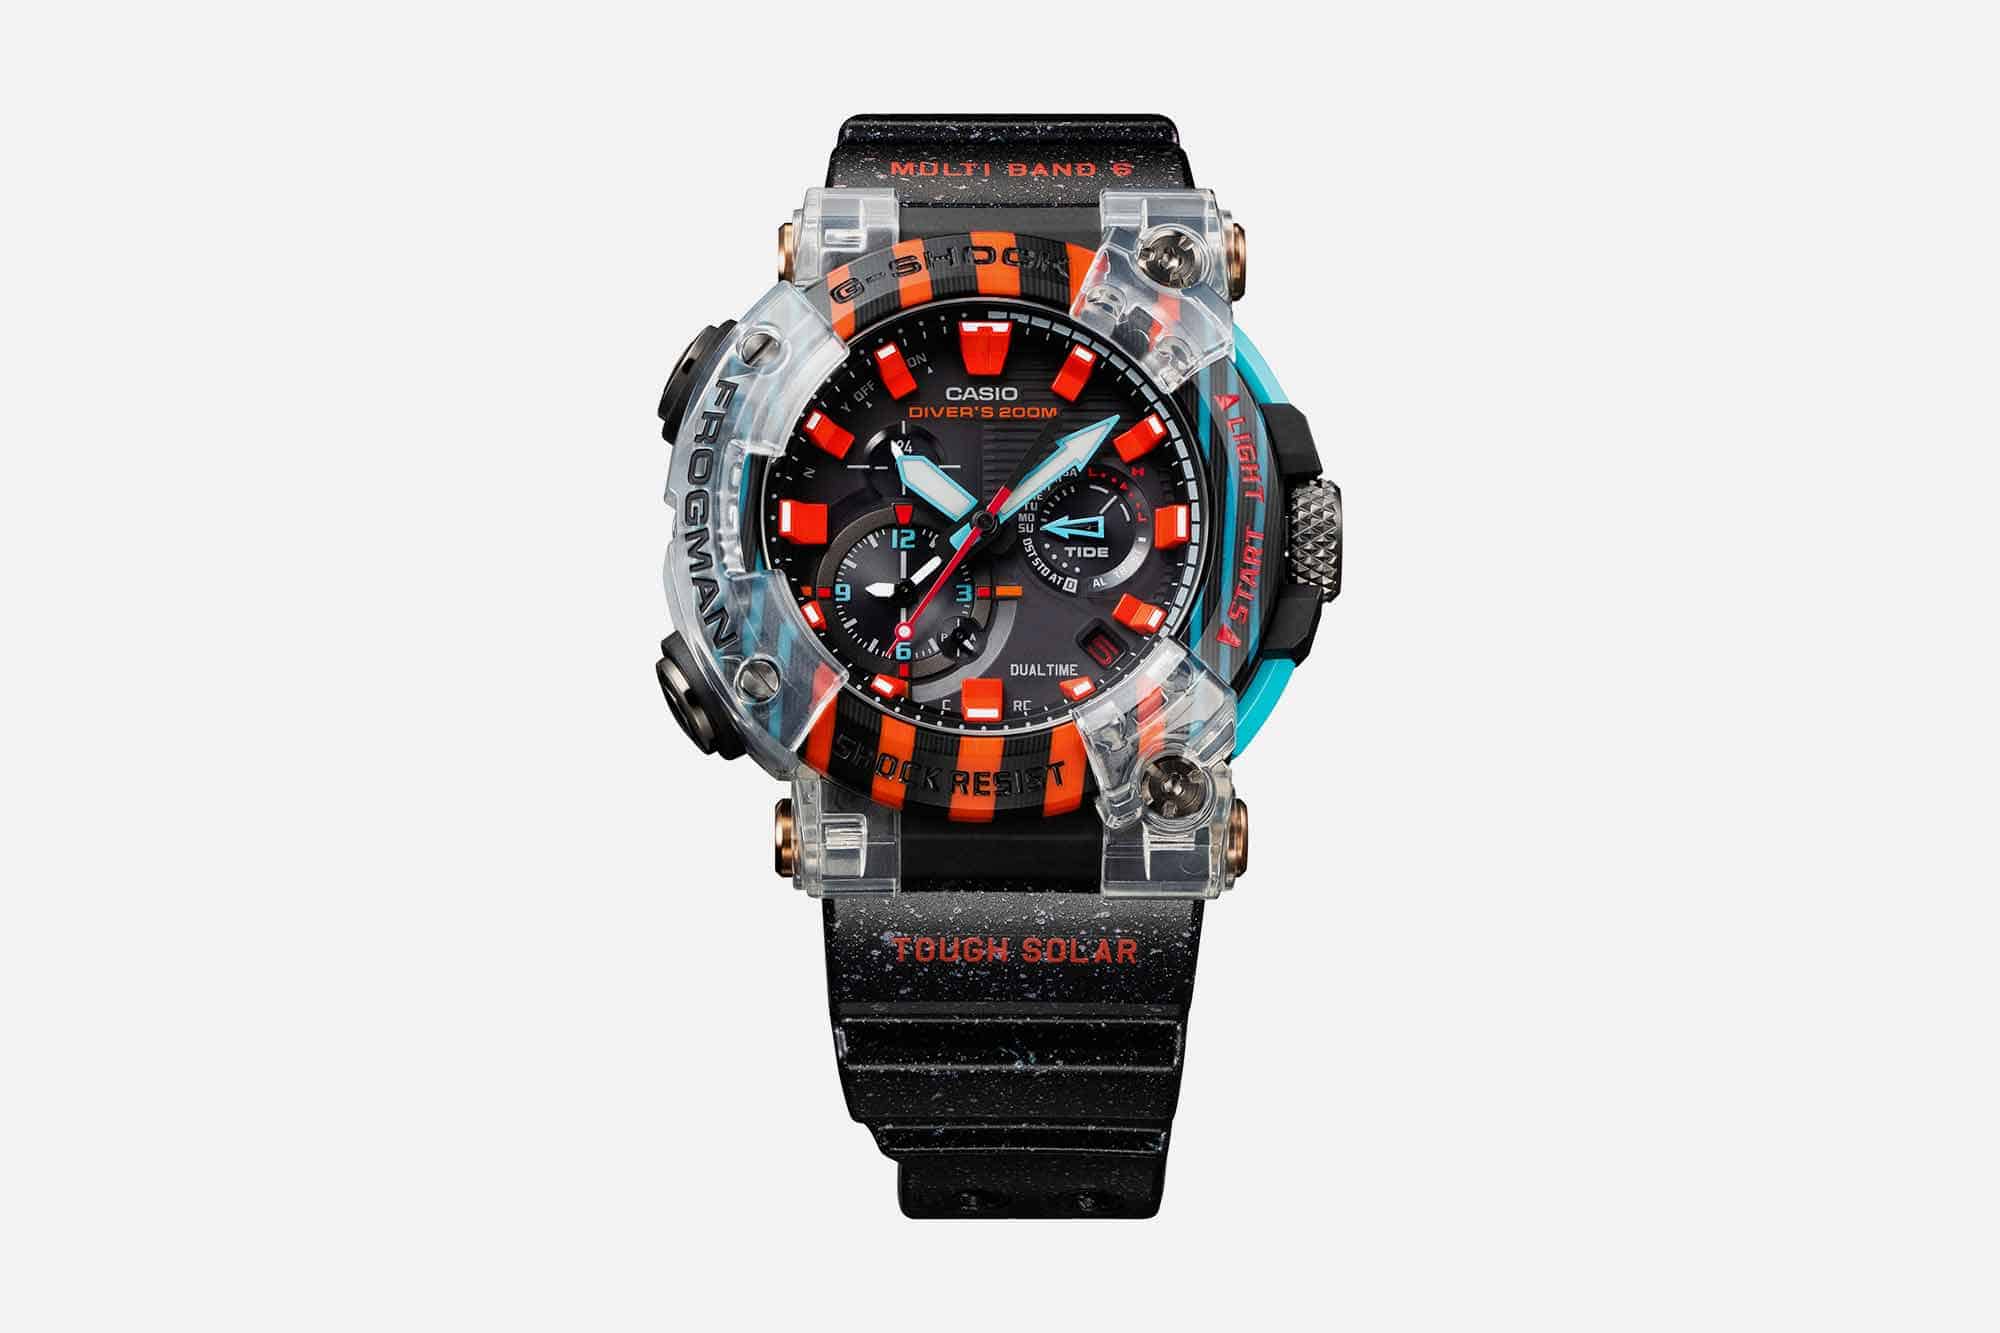 G-SHOCK Celebrates the 30th Anniversary of the Frogman with a